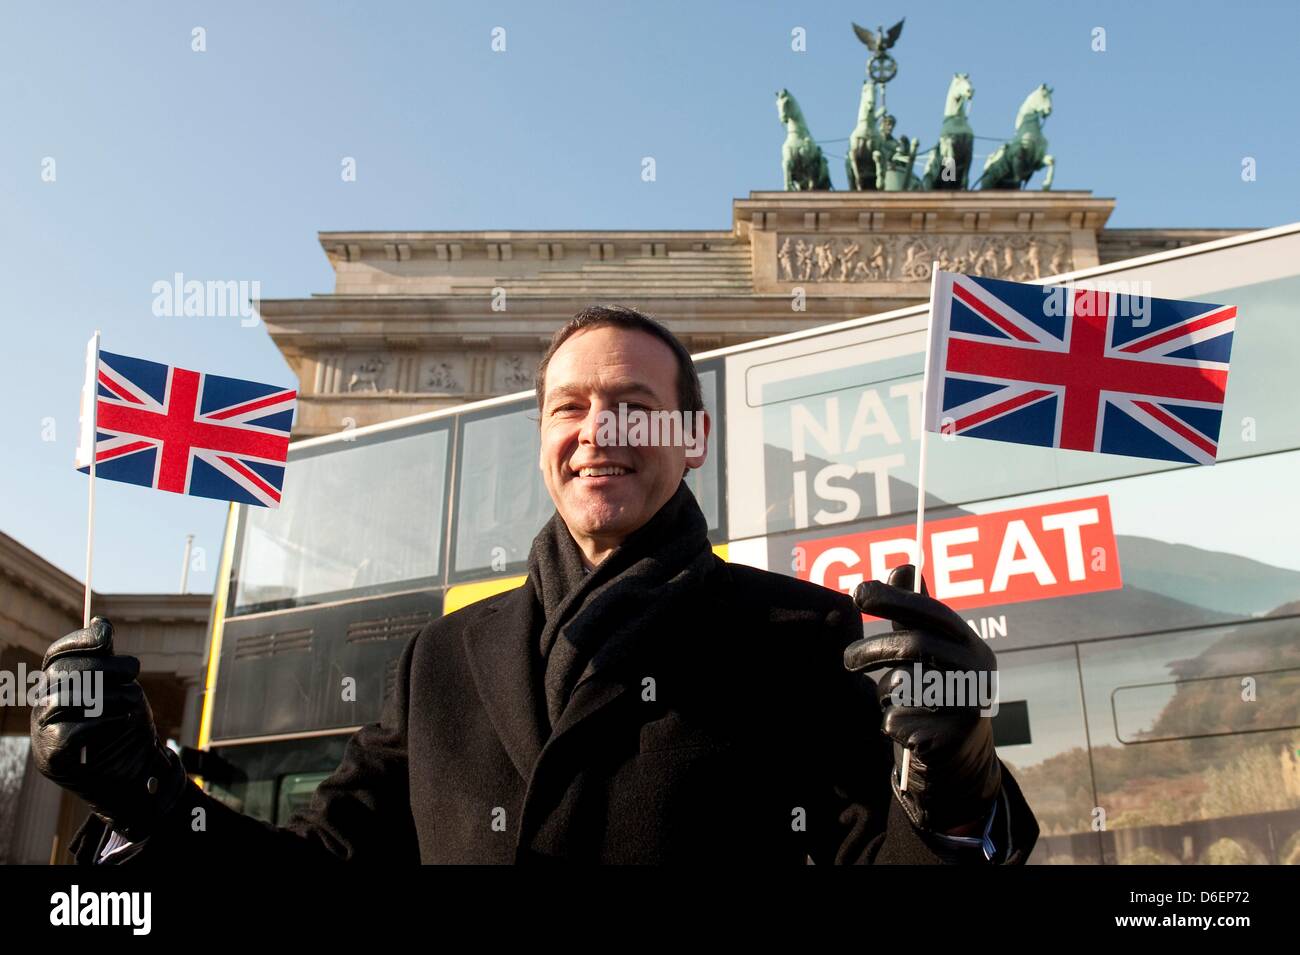 British Ambassador Simon McDonald poses in front of a double-decker bus of the Berlin Transport Services (BVG) with the advertisement slogan 'Natur is Great Britain' in front of the Brandenburg Gate in Berlin, Germany, 08 February 2012. The world wide advertisement campaign for Great Britain on the occasion of the Olympic and Paralympic Games in 2012 started today. Photo: SEBASTIAN Stock Photo